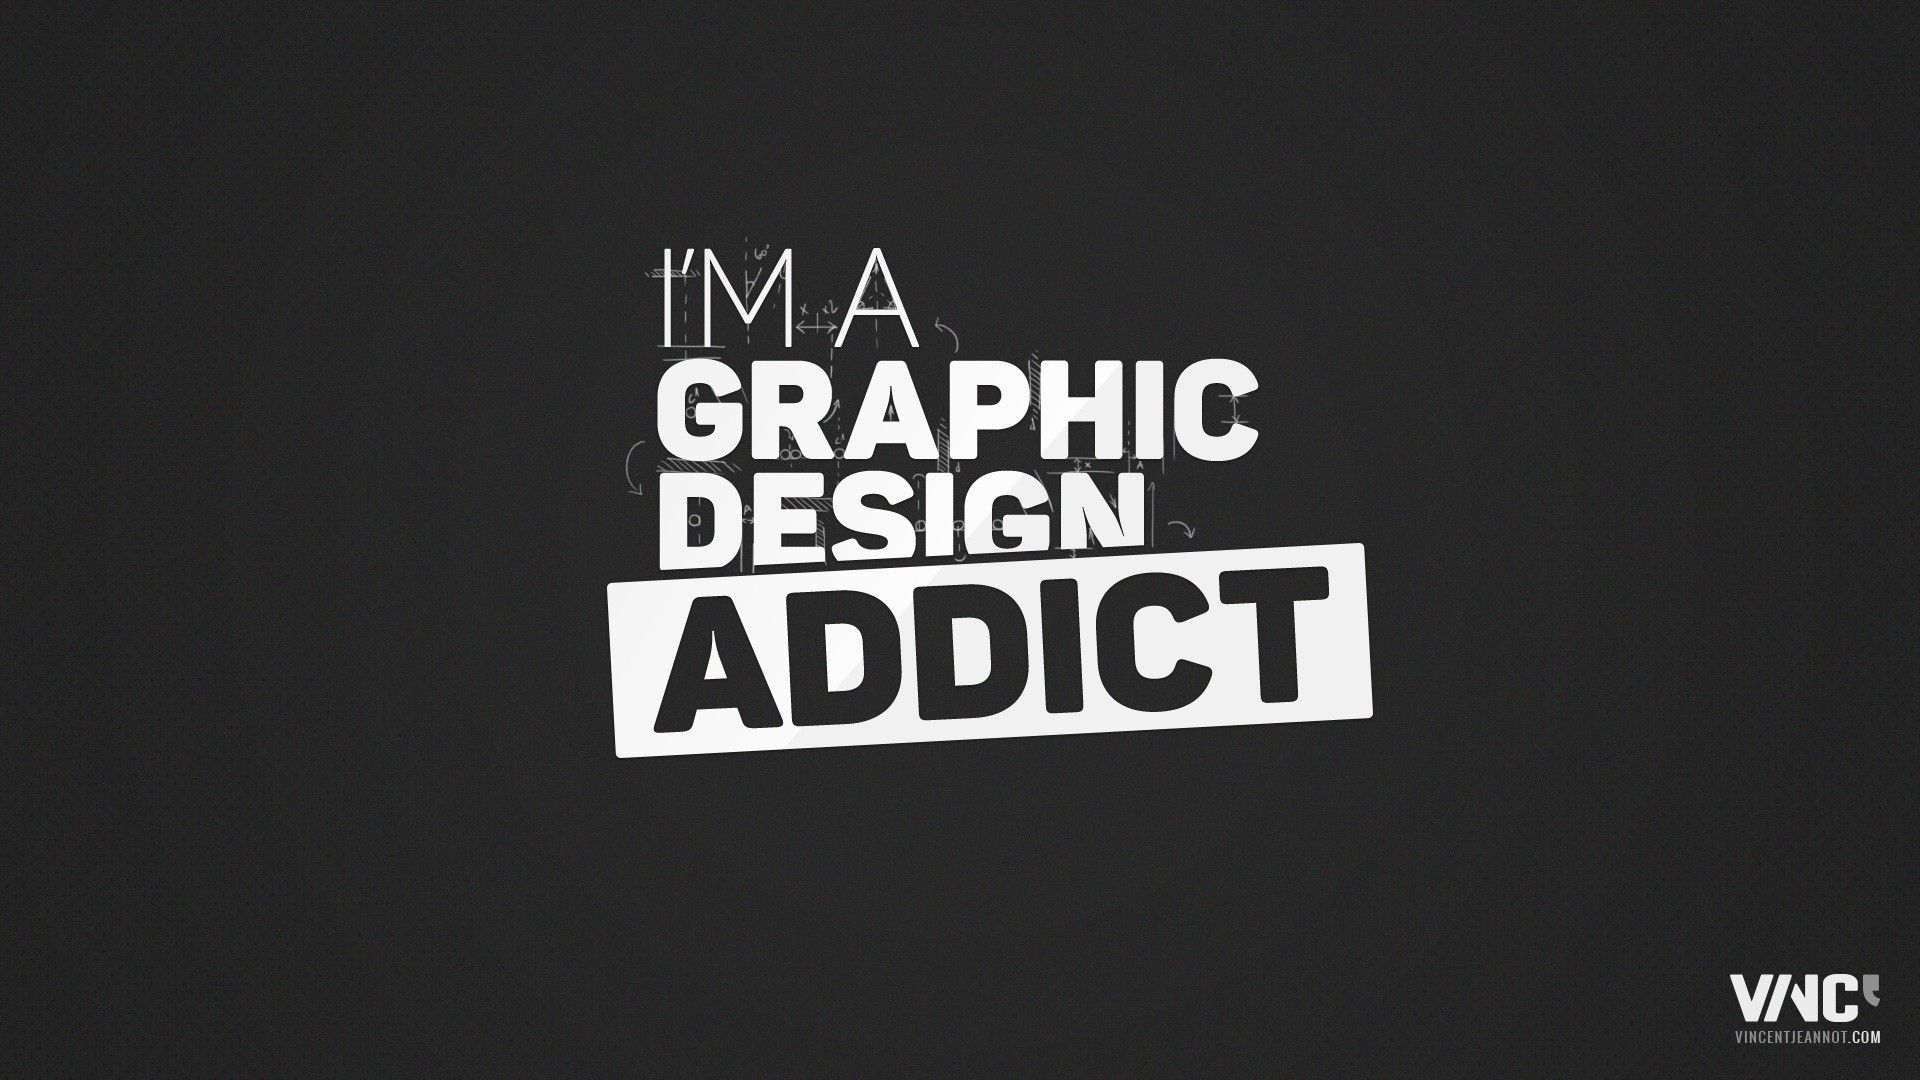 I Am A Graphic Design Addict, HD Typography, 4k Wallpaper, Image, Background, Photo and Picture